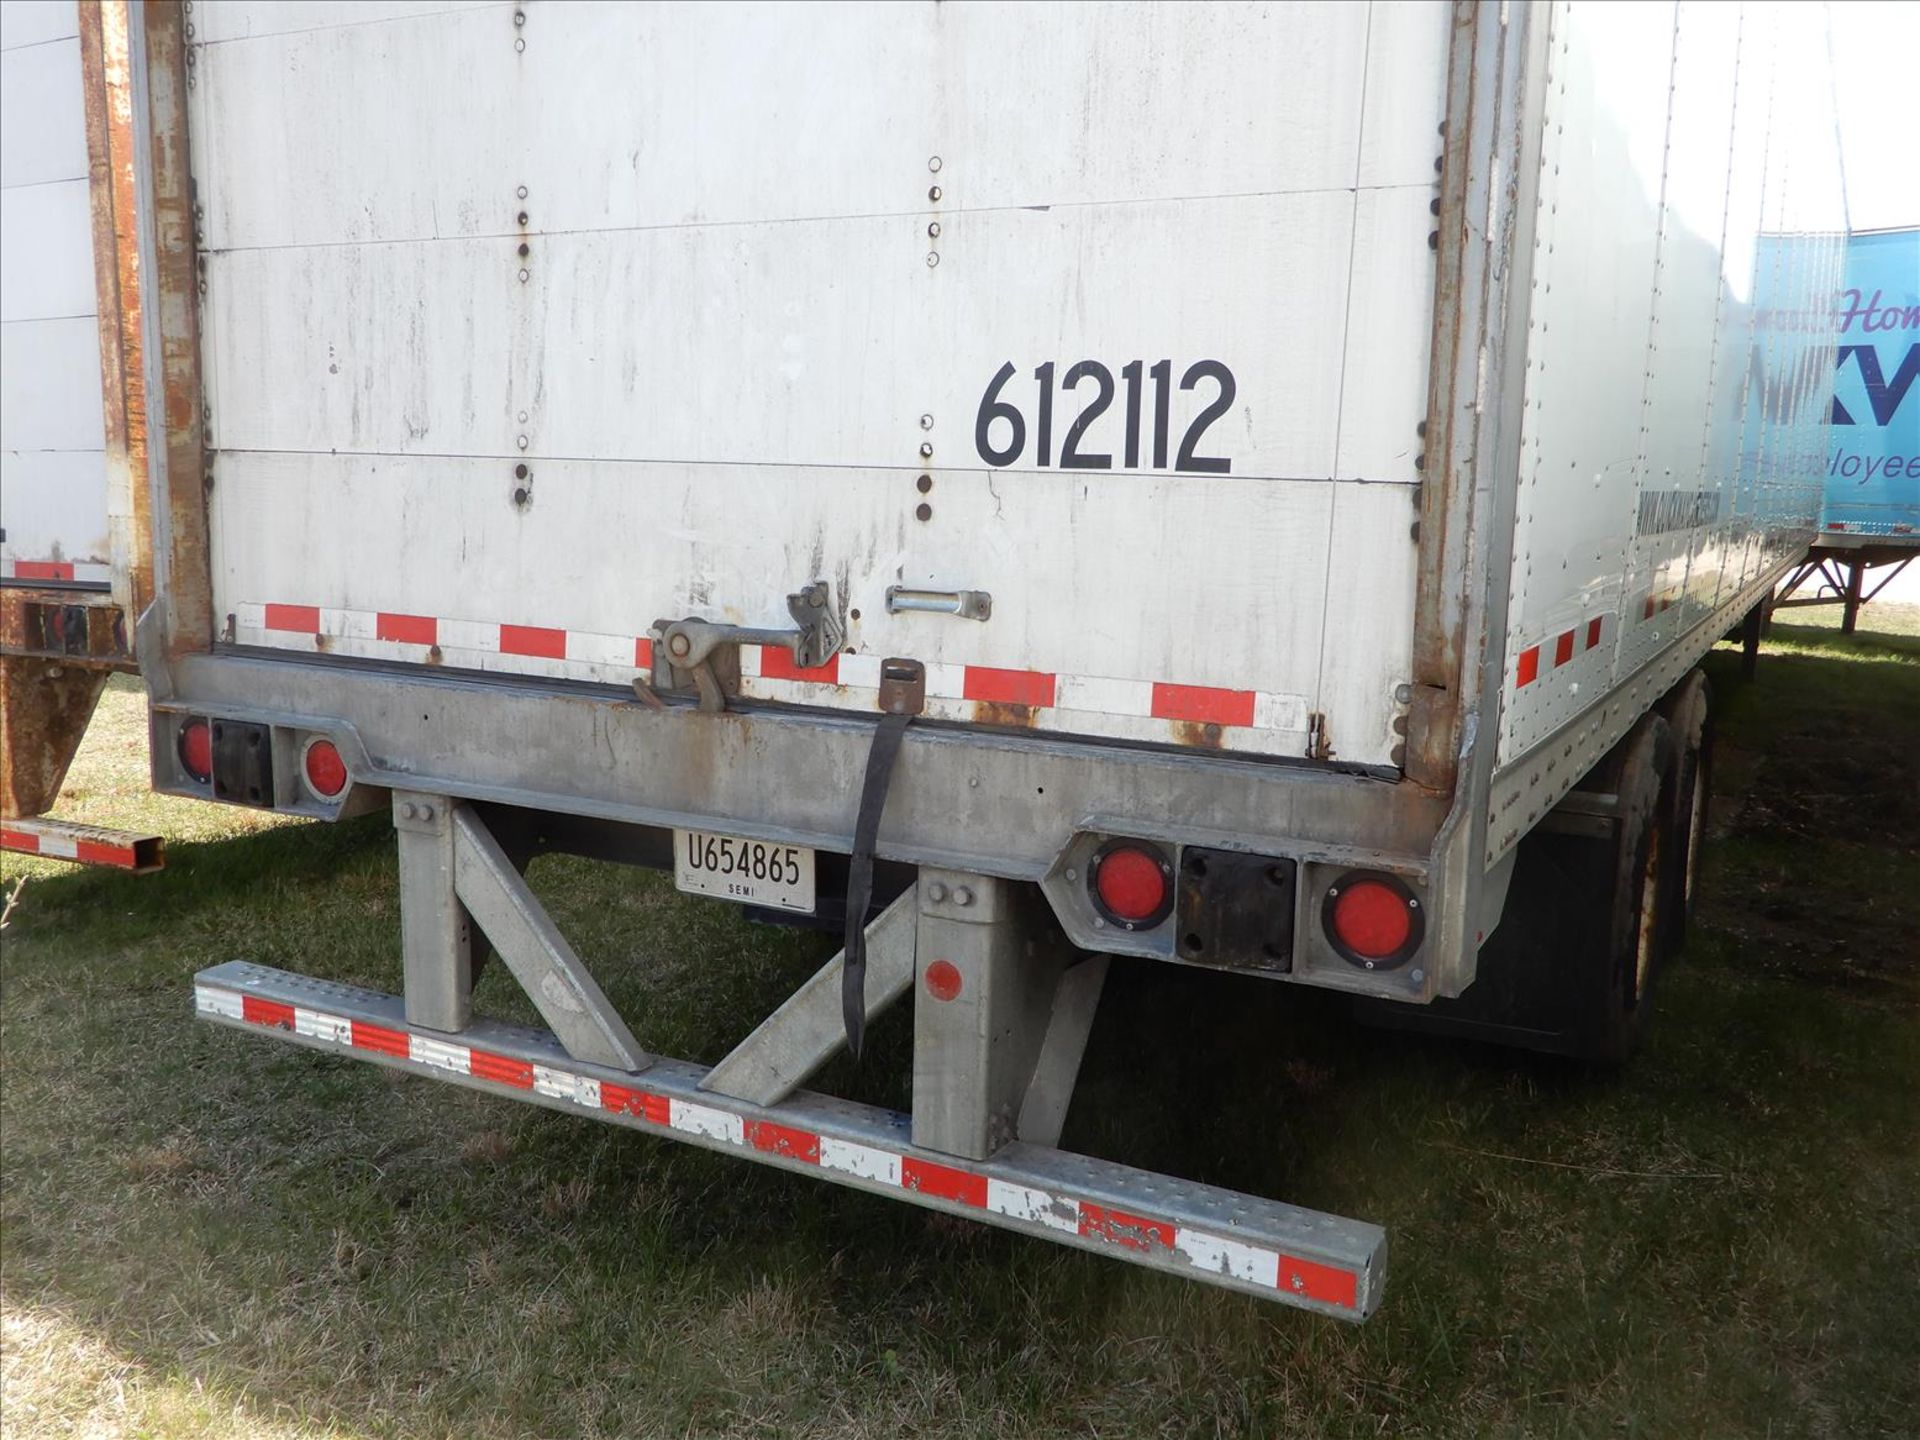 2012 Vanguard Trailer - Located in Indianapolis, IN - Image 17 of 29